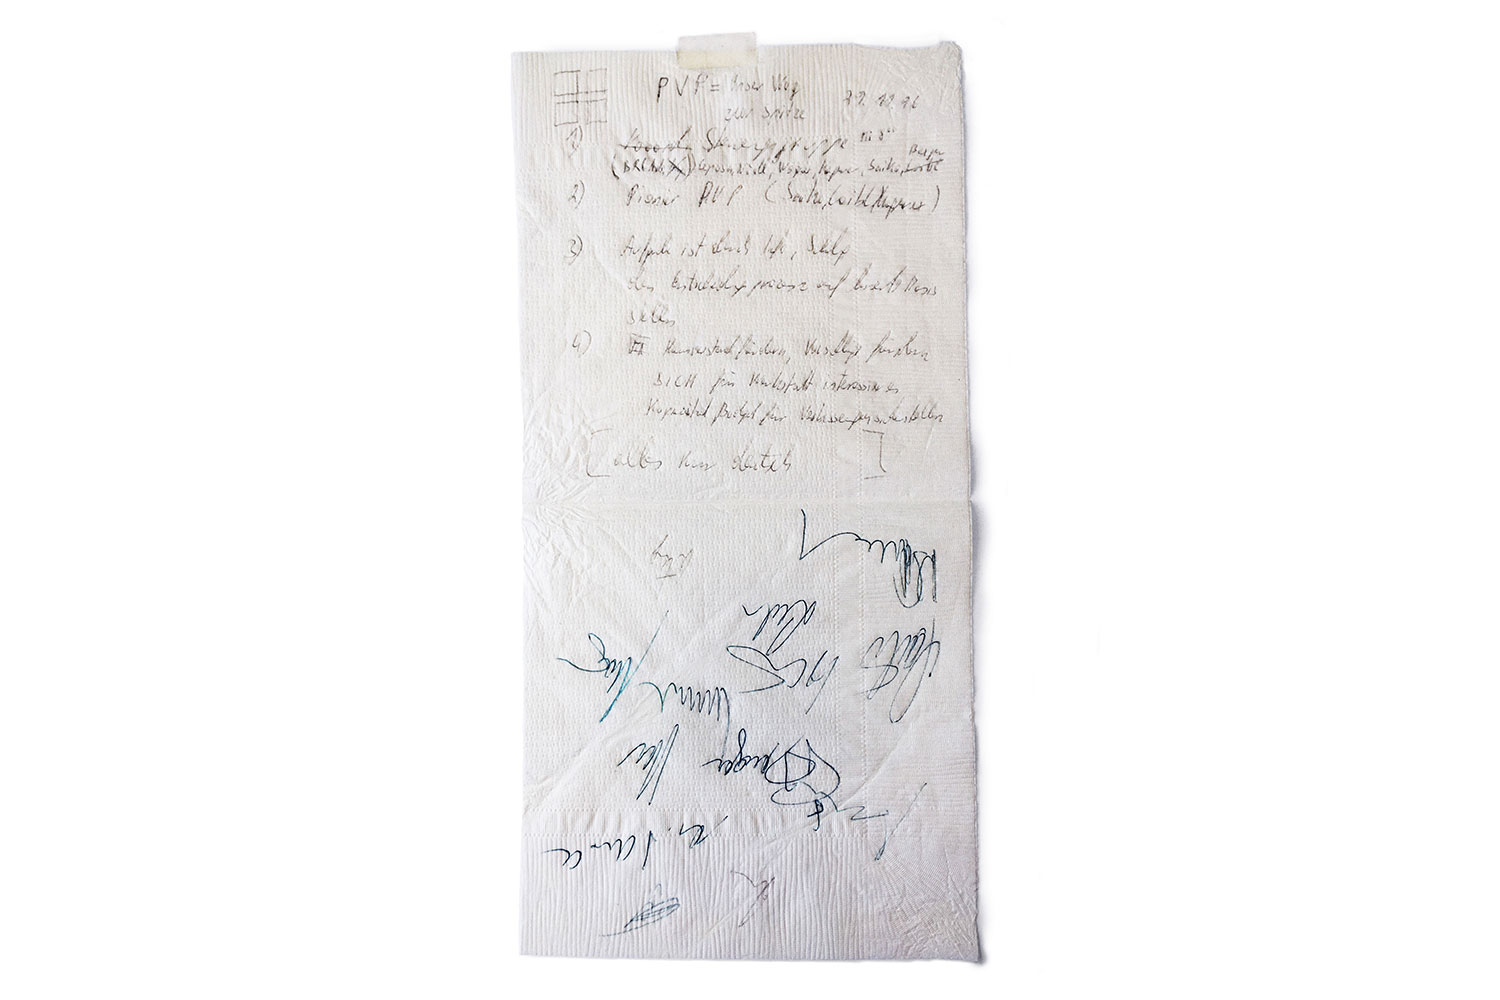 The legendary start-up napkin, on which the management commit themselves by signing up to the PÖTTINGER improvement process.